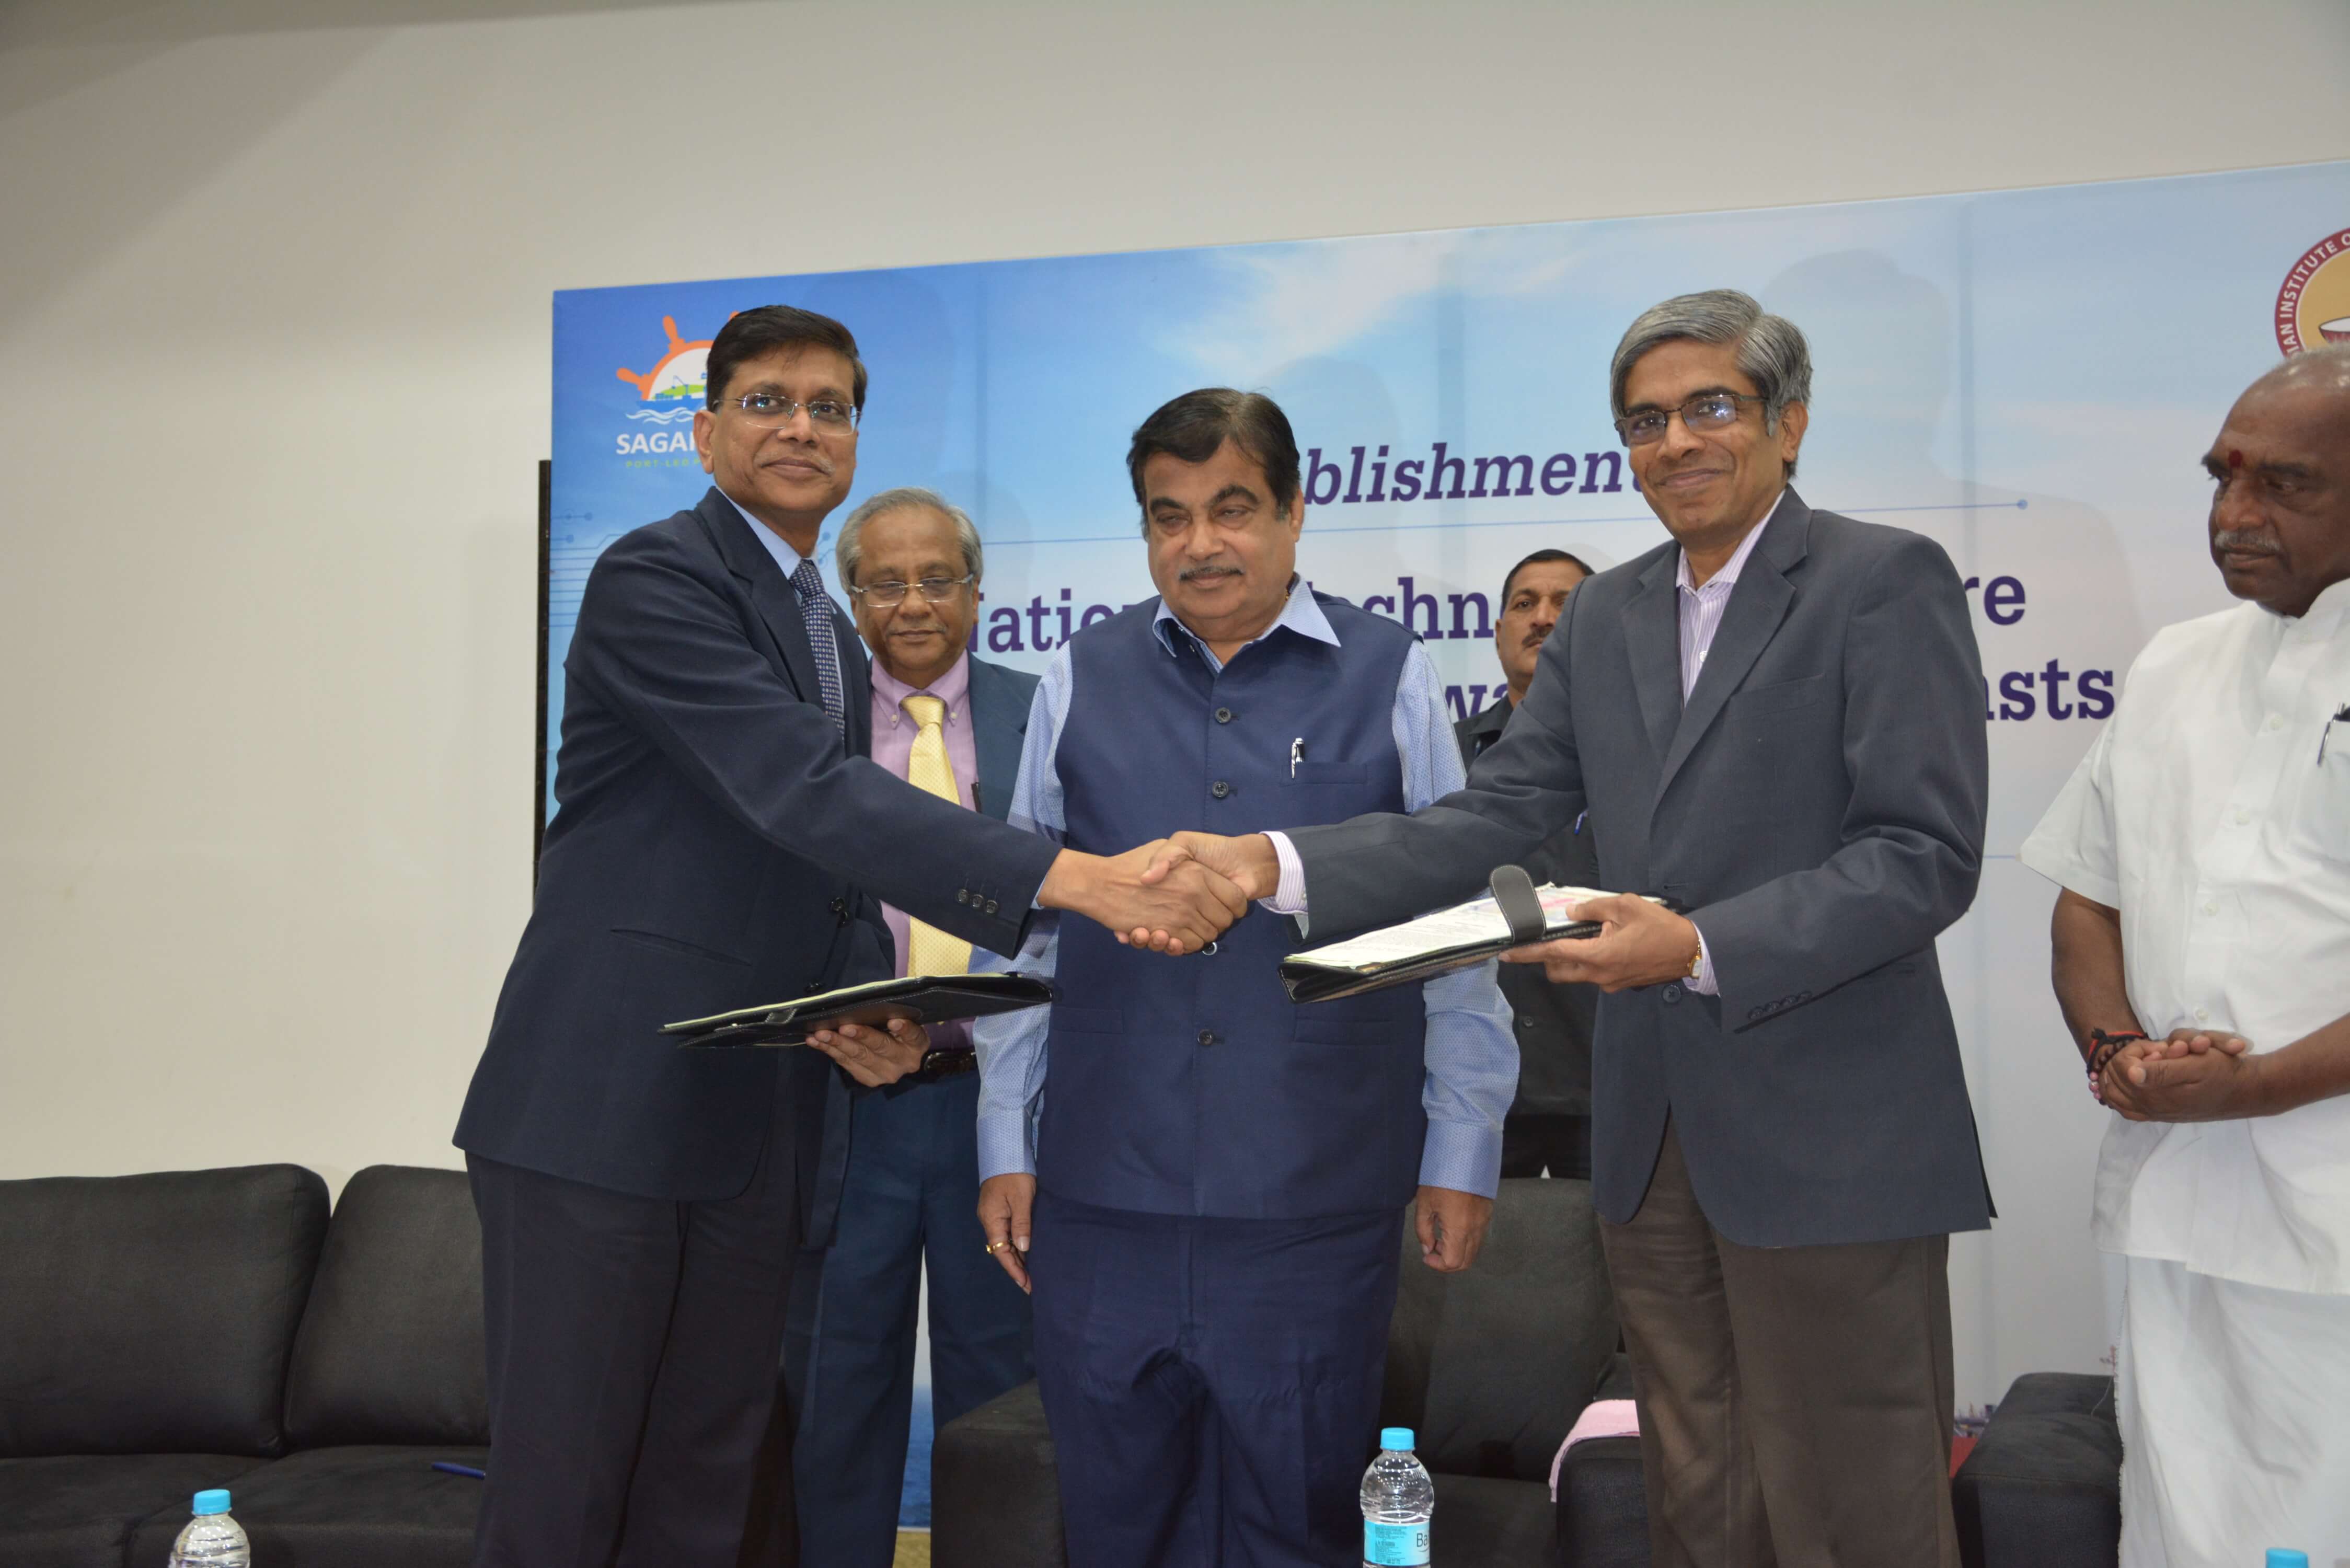 Union Shipping Minister Mr Nitin Gadkari launches Technology Centre at IIT Madras to modernize India’s ports and fast track waterways